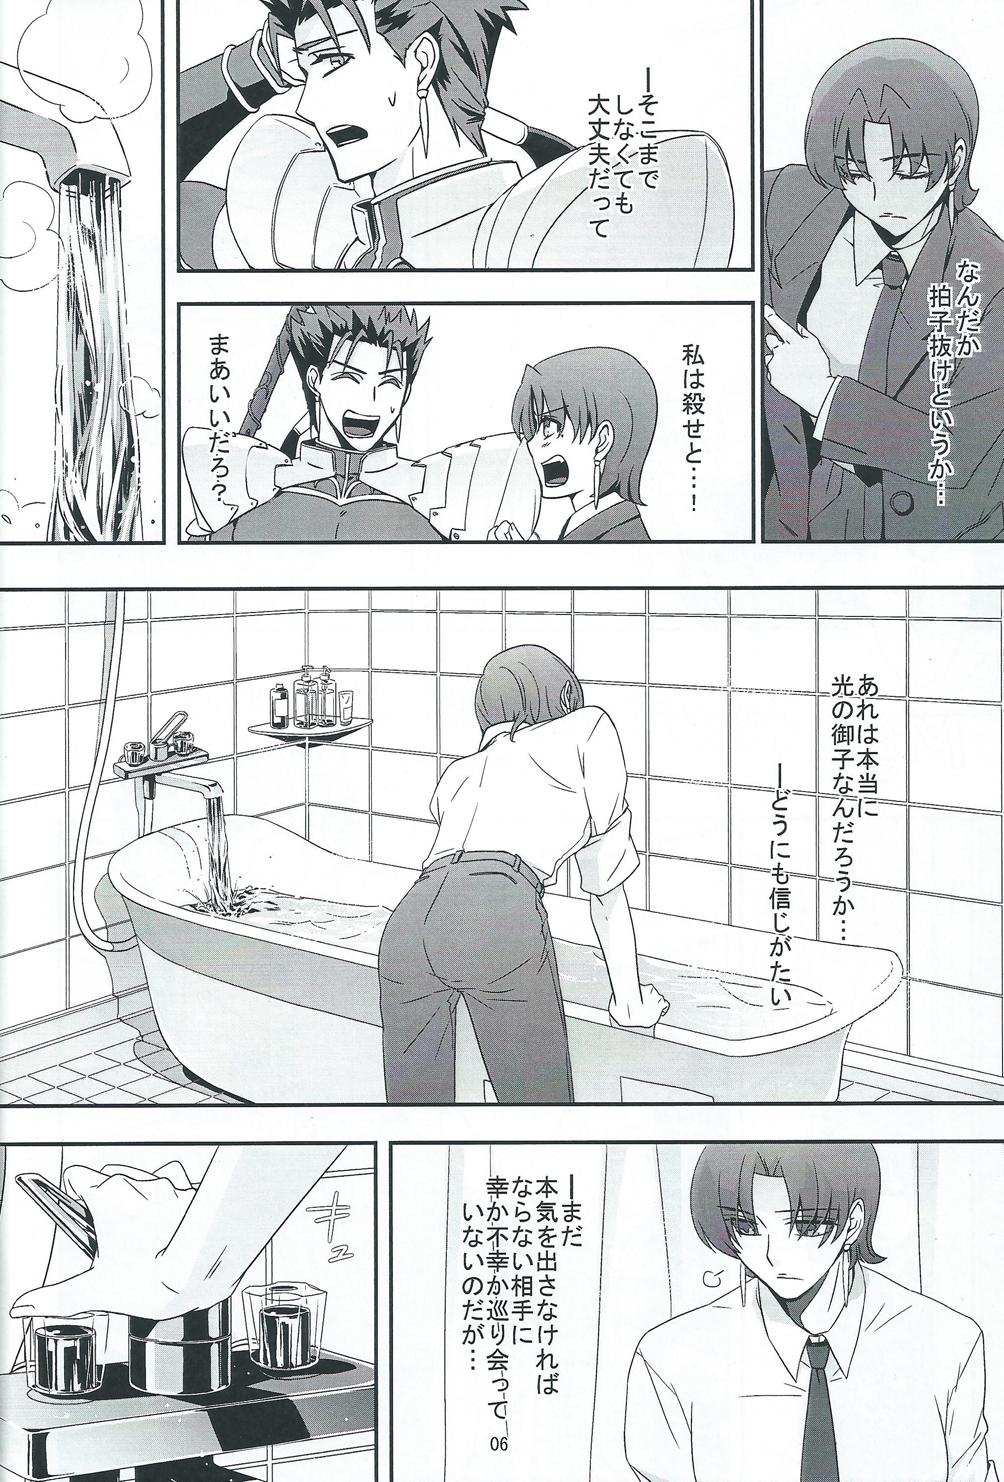 Real Amateurs My Heart Goes Bang - Fate hollow ataraxia Couples - Page 5